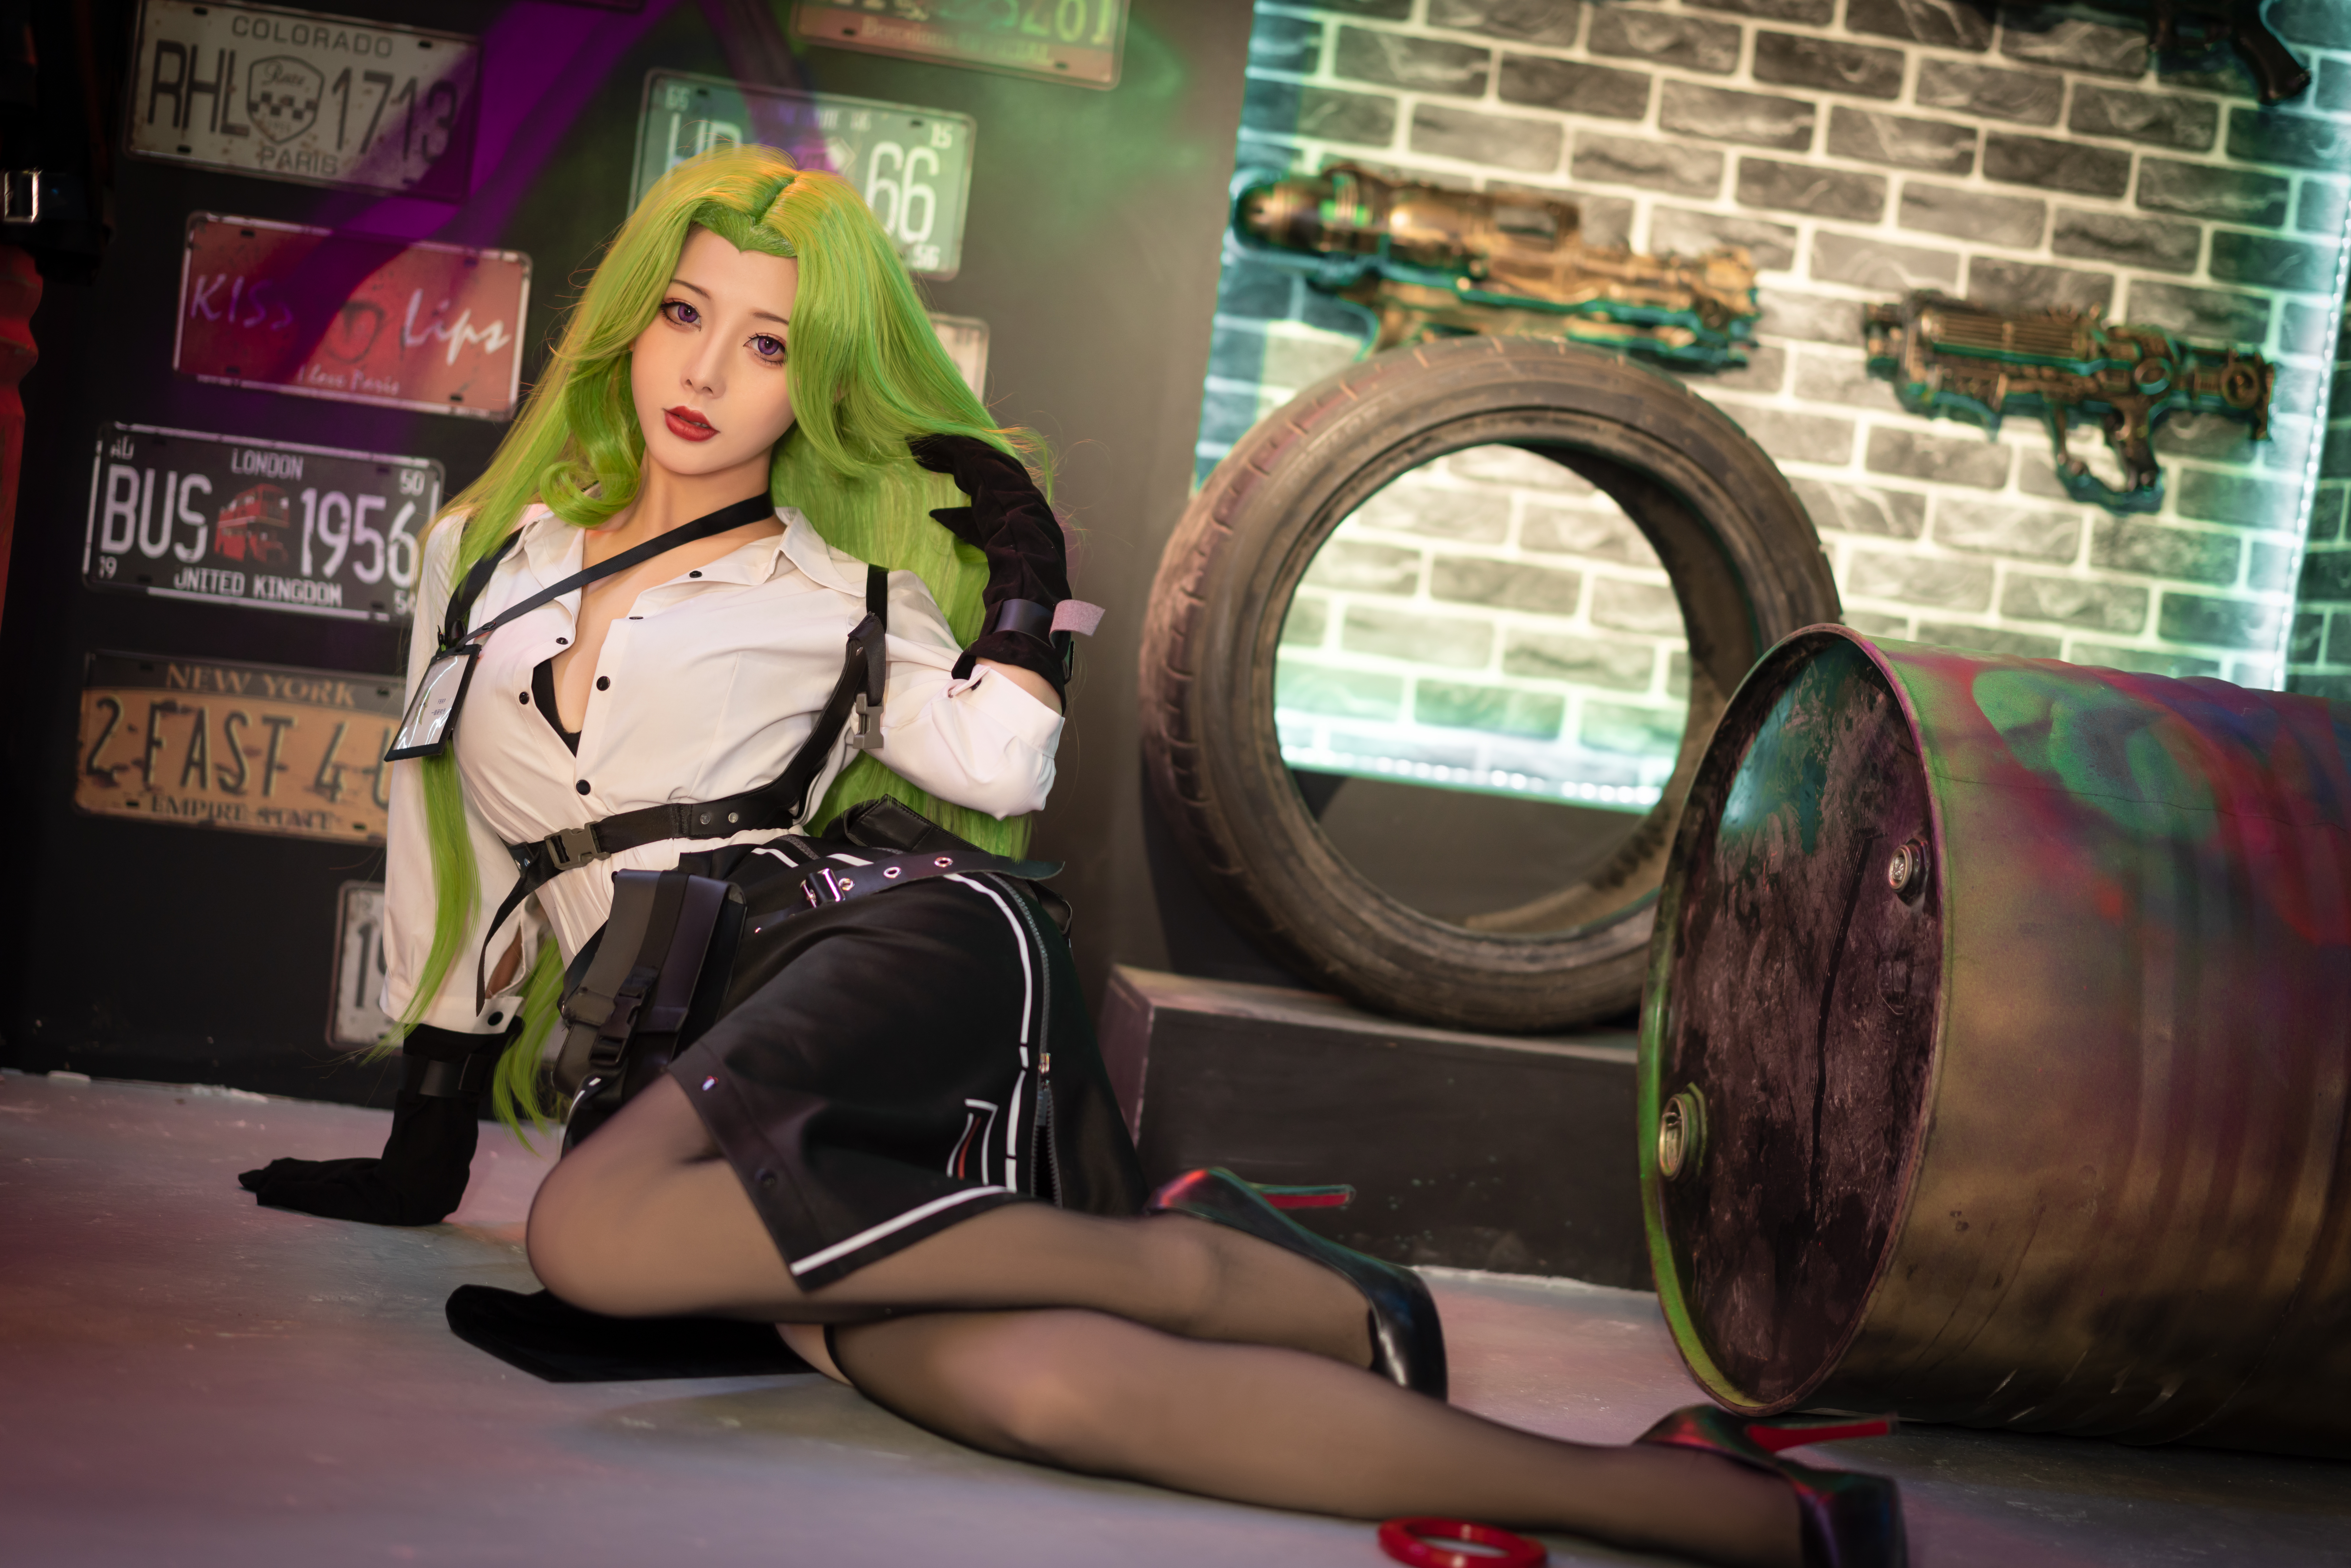 People 7952x5304 Mirror 2: Project X cosplay green hair Asian women